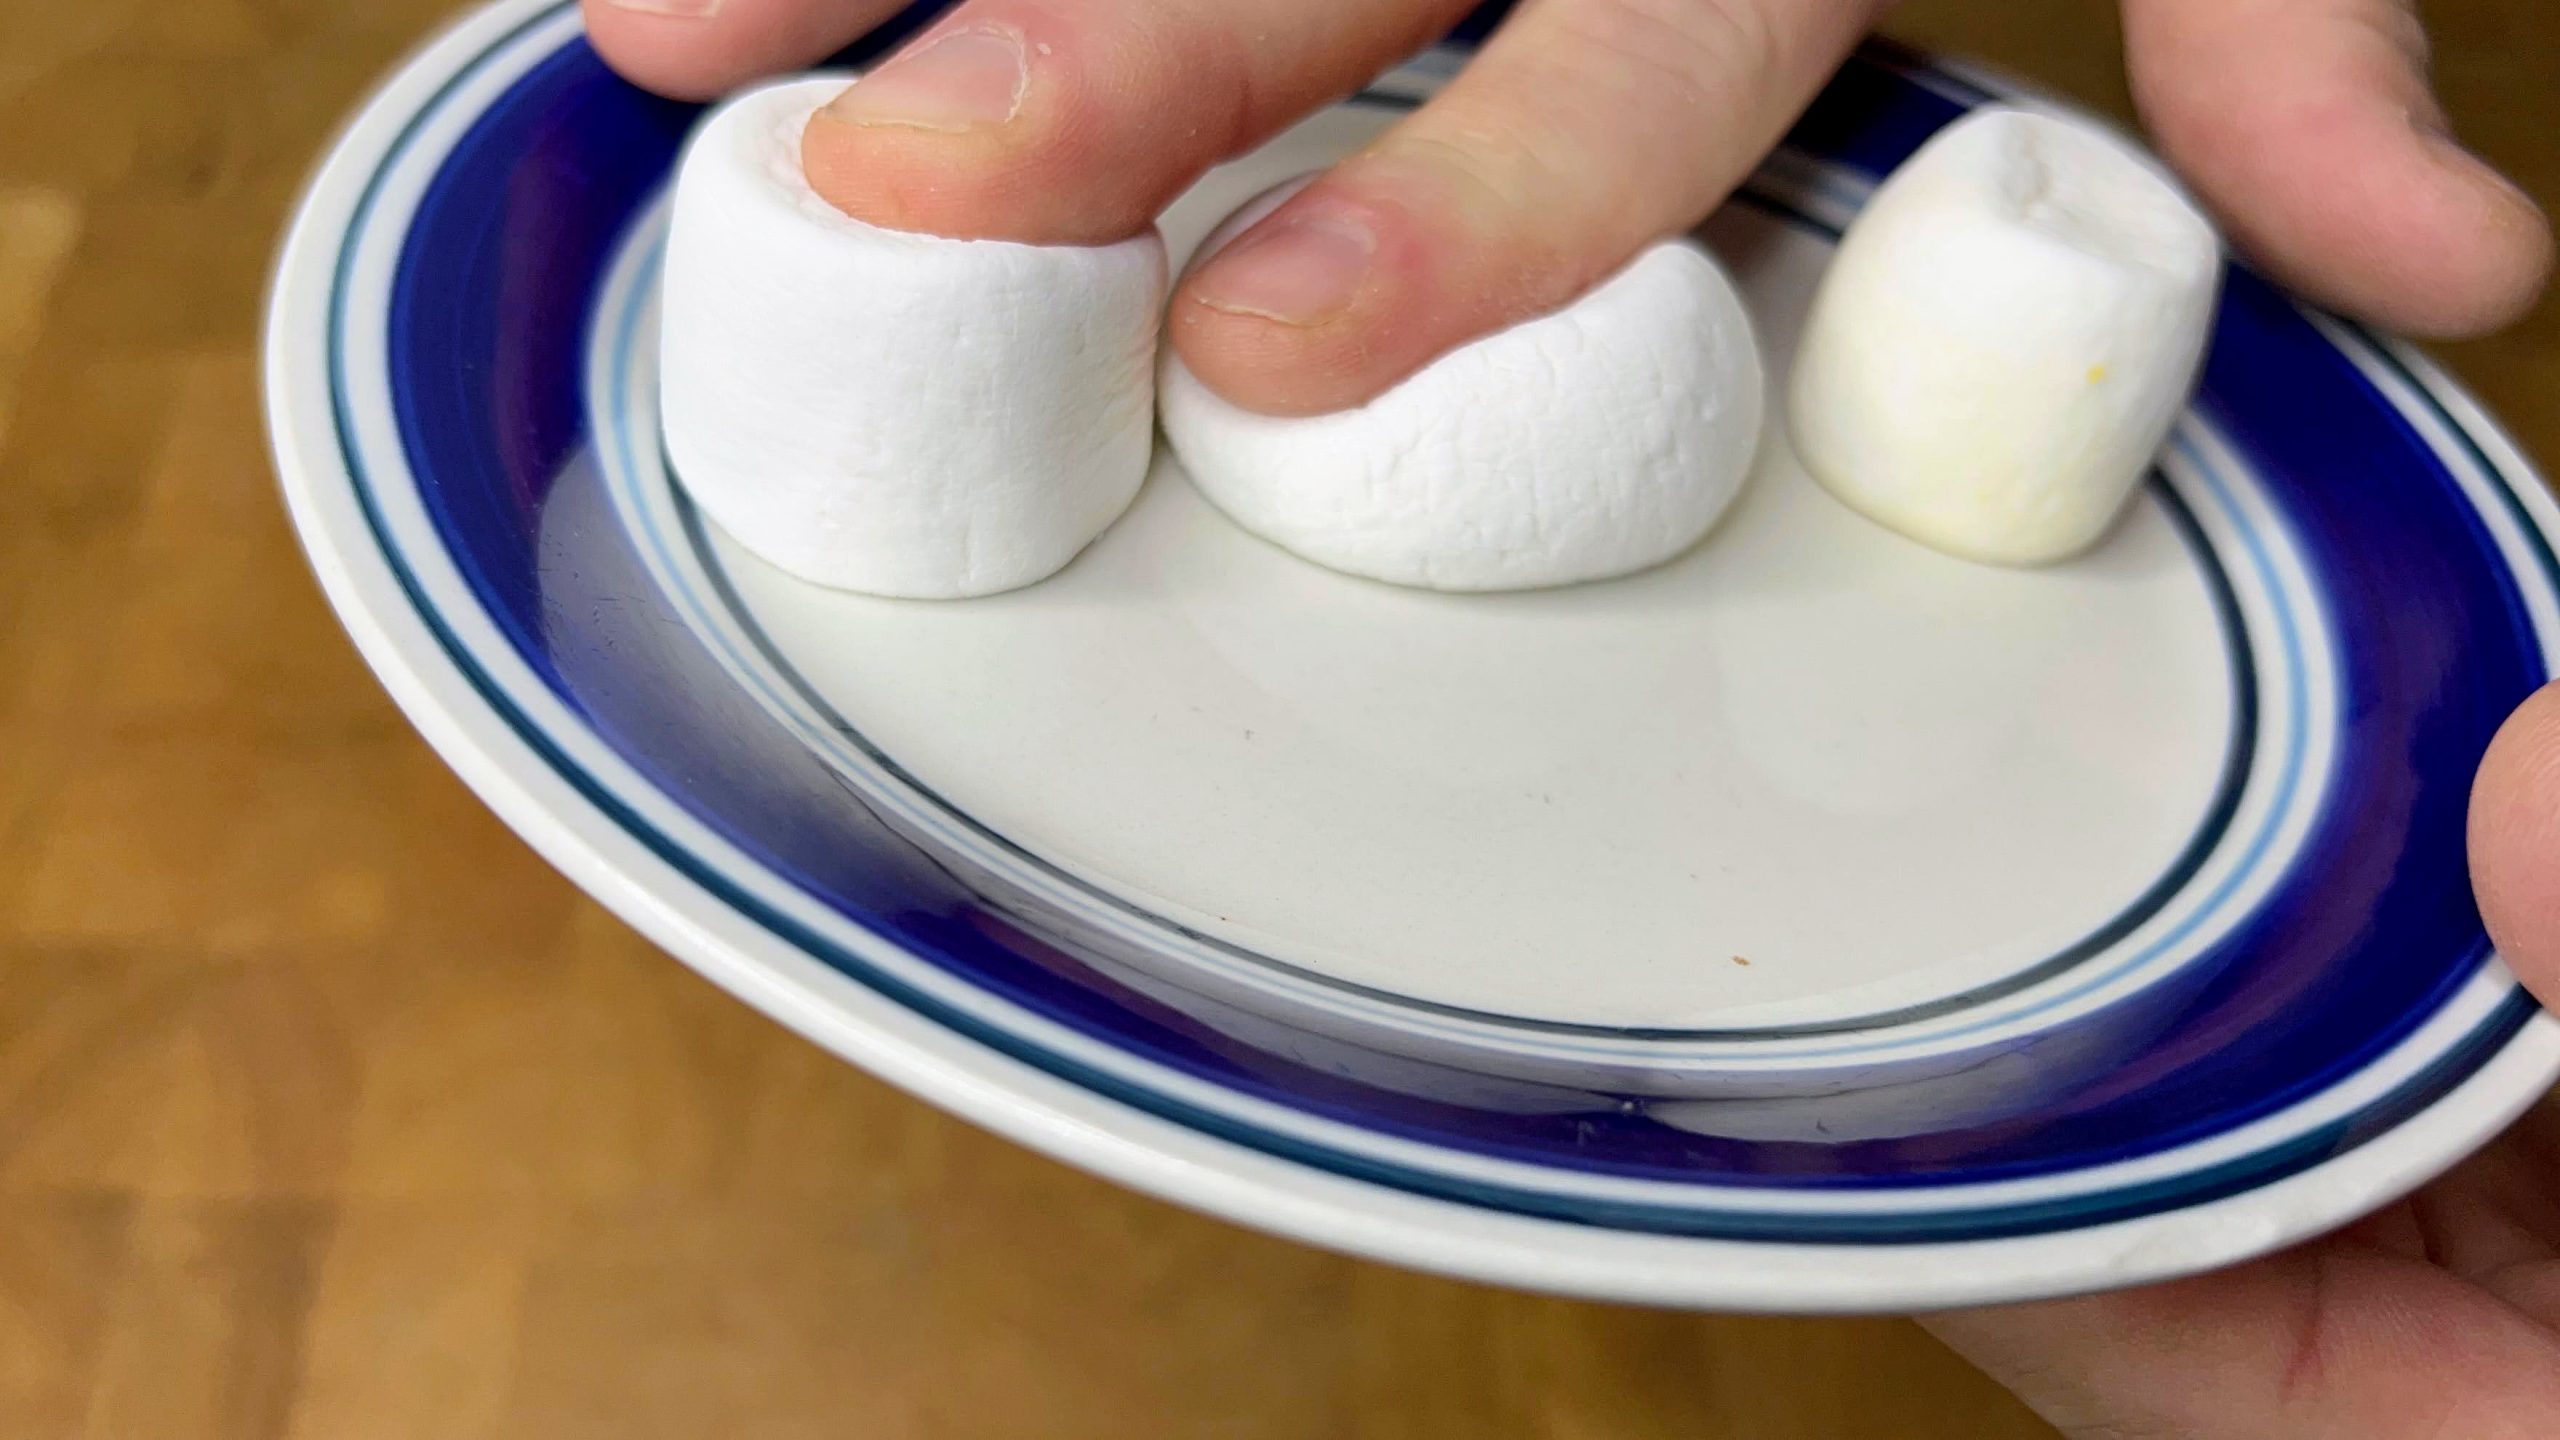 three marshmallows on a plate, pressing on far left and middle one